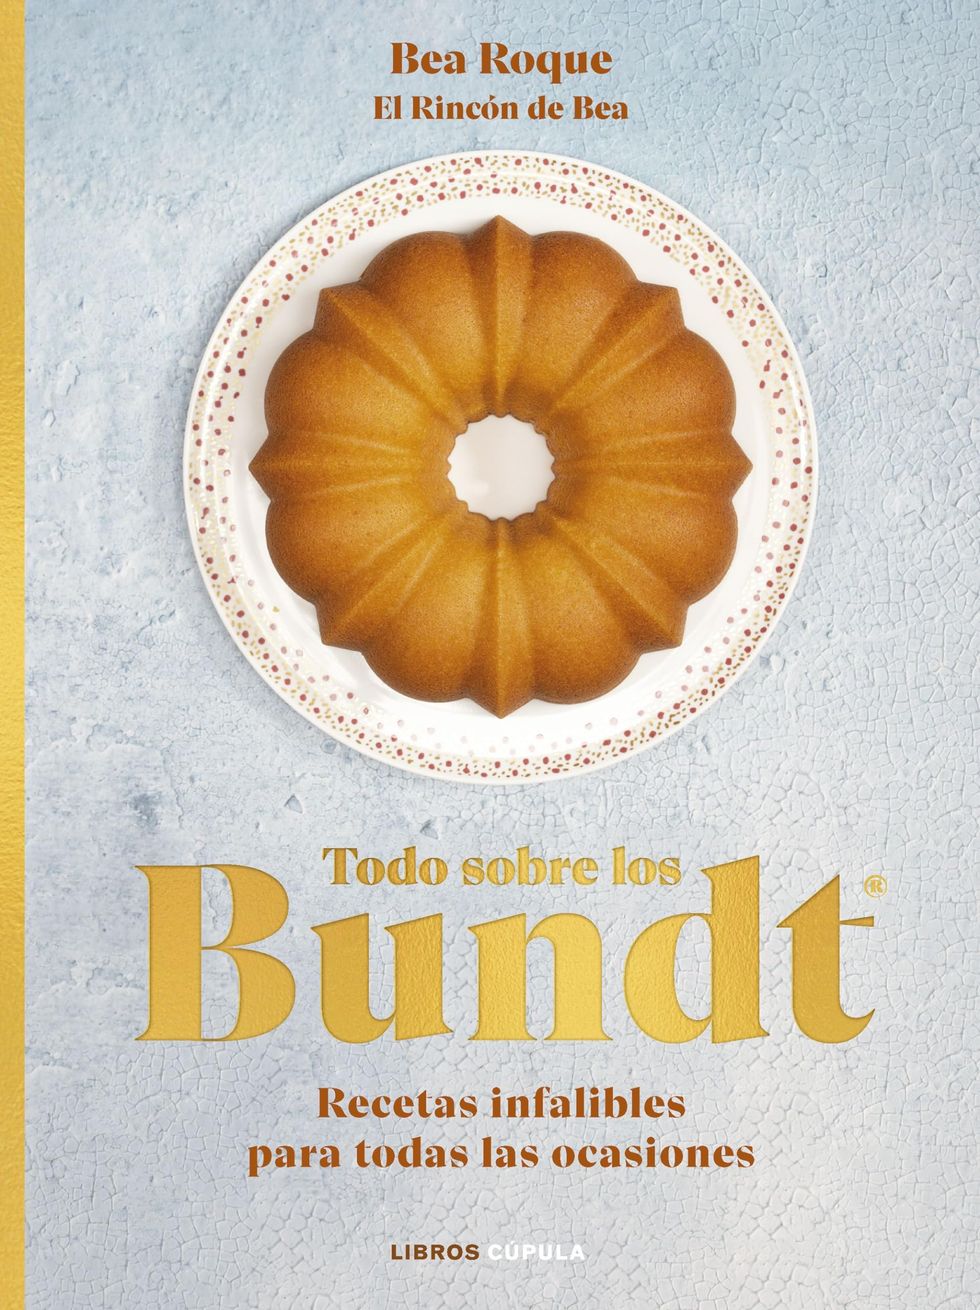 About Bundt®: Foolproof Recipes for All Occasions